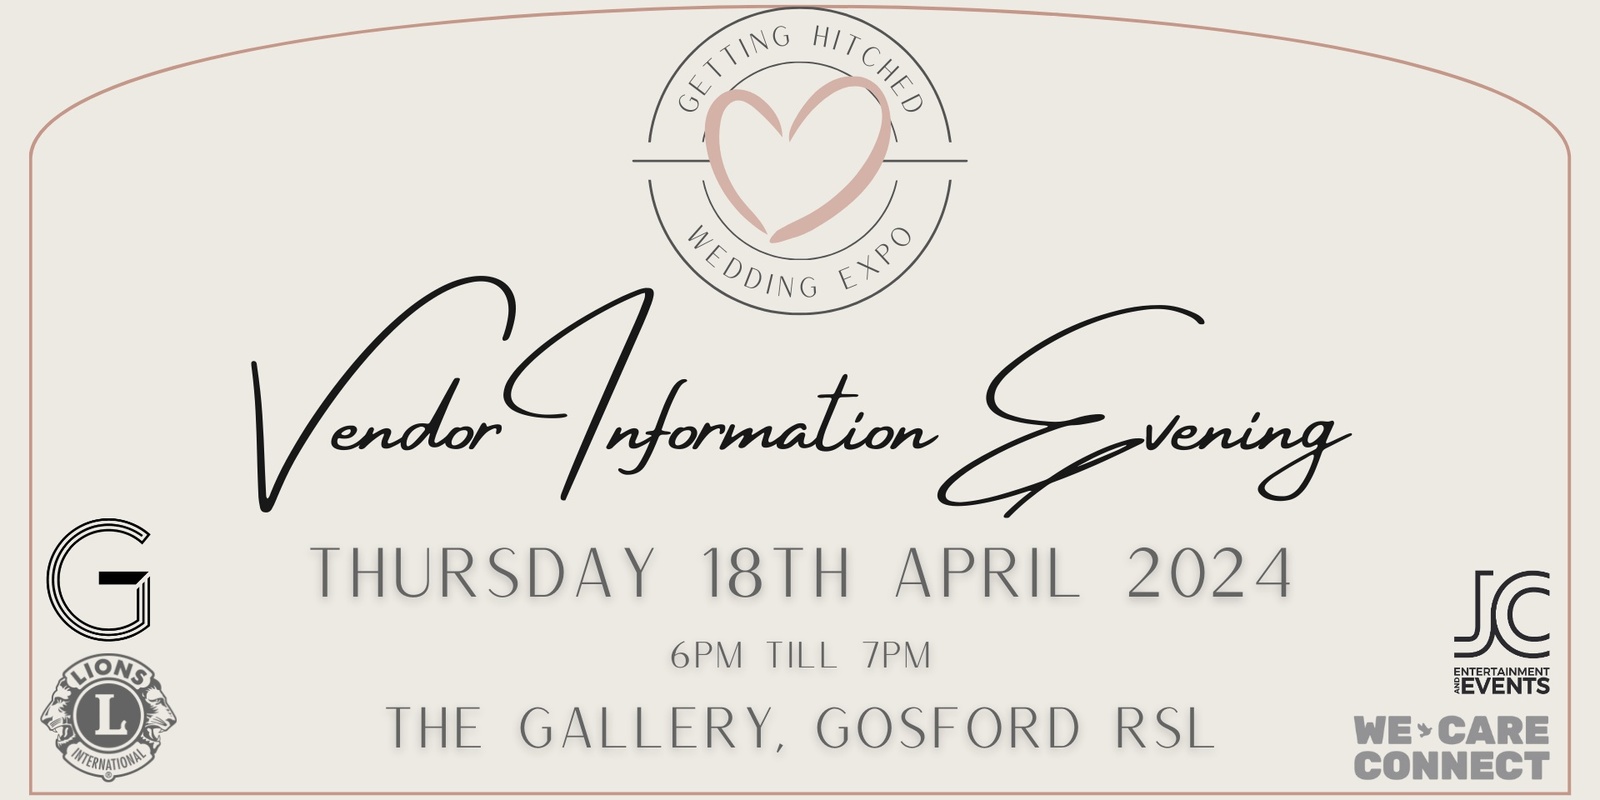 Banner image for Getting Hitched Wedding Expo: Vendor Information Evening